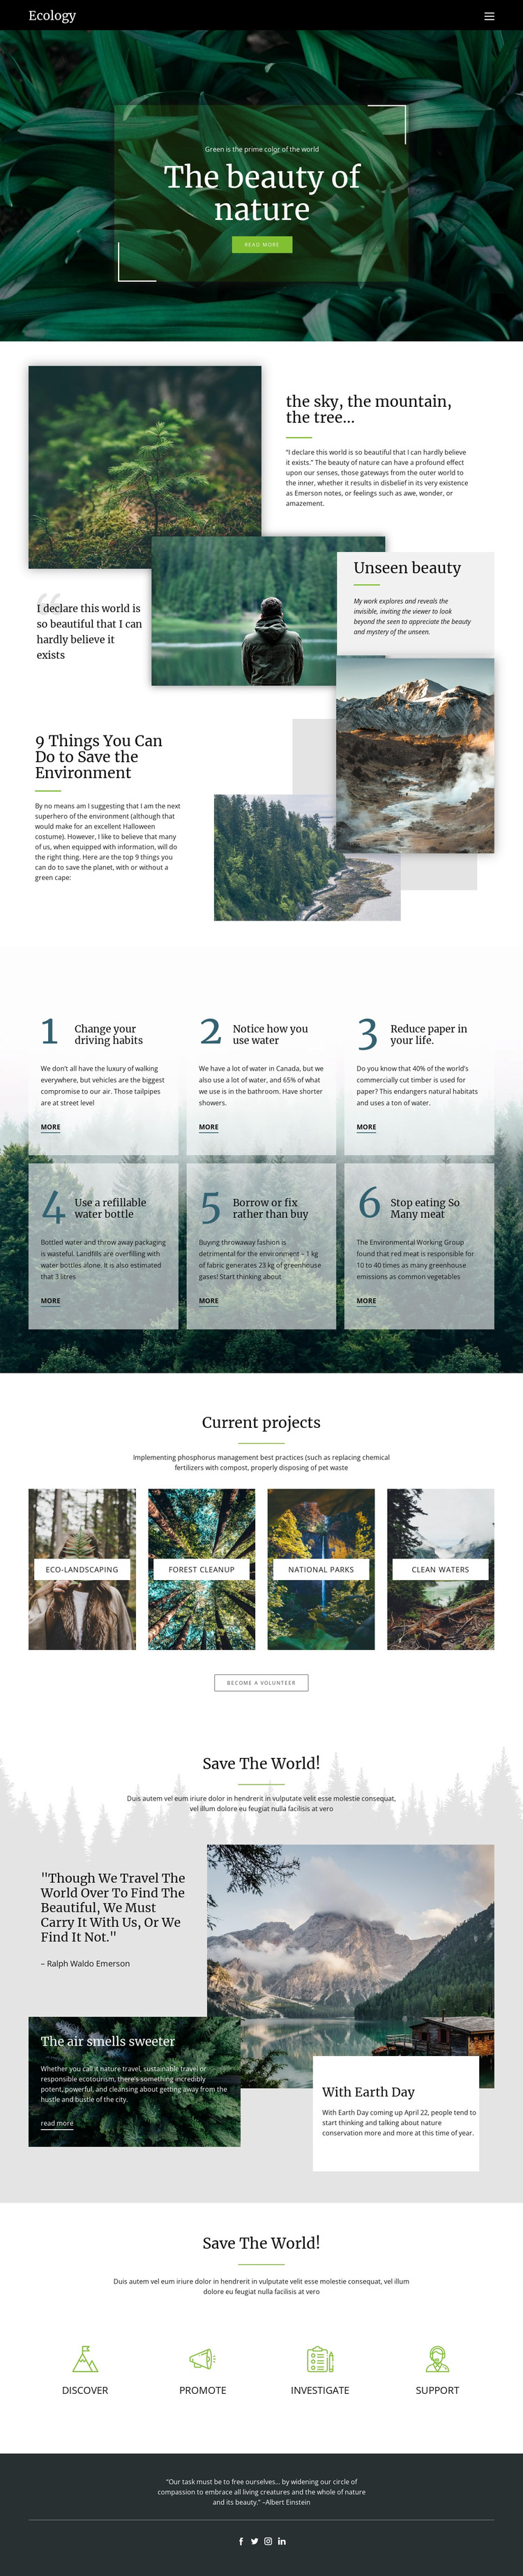 Skies and beauty of nature Web Design